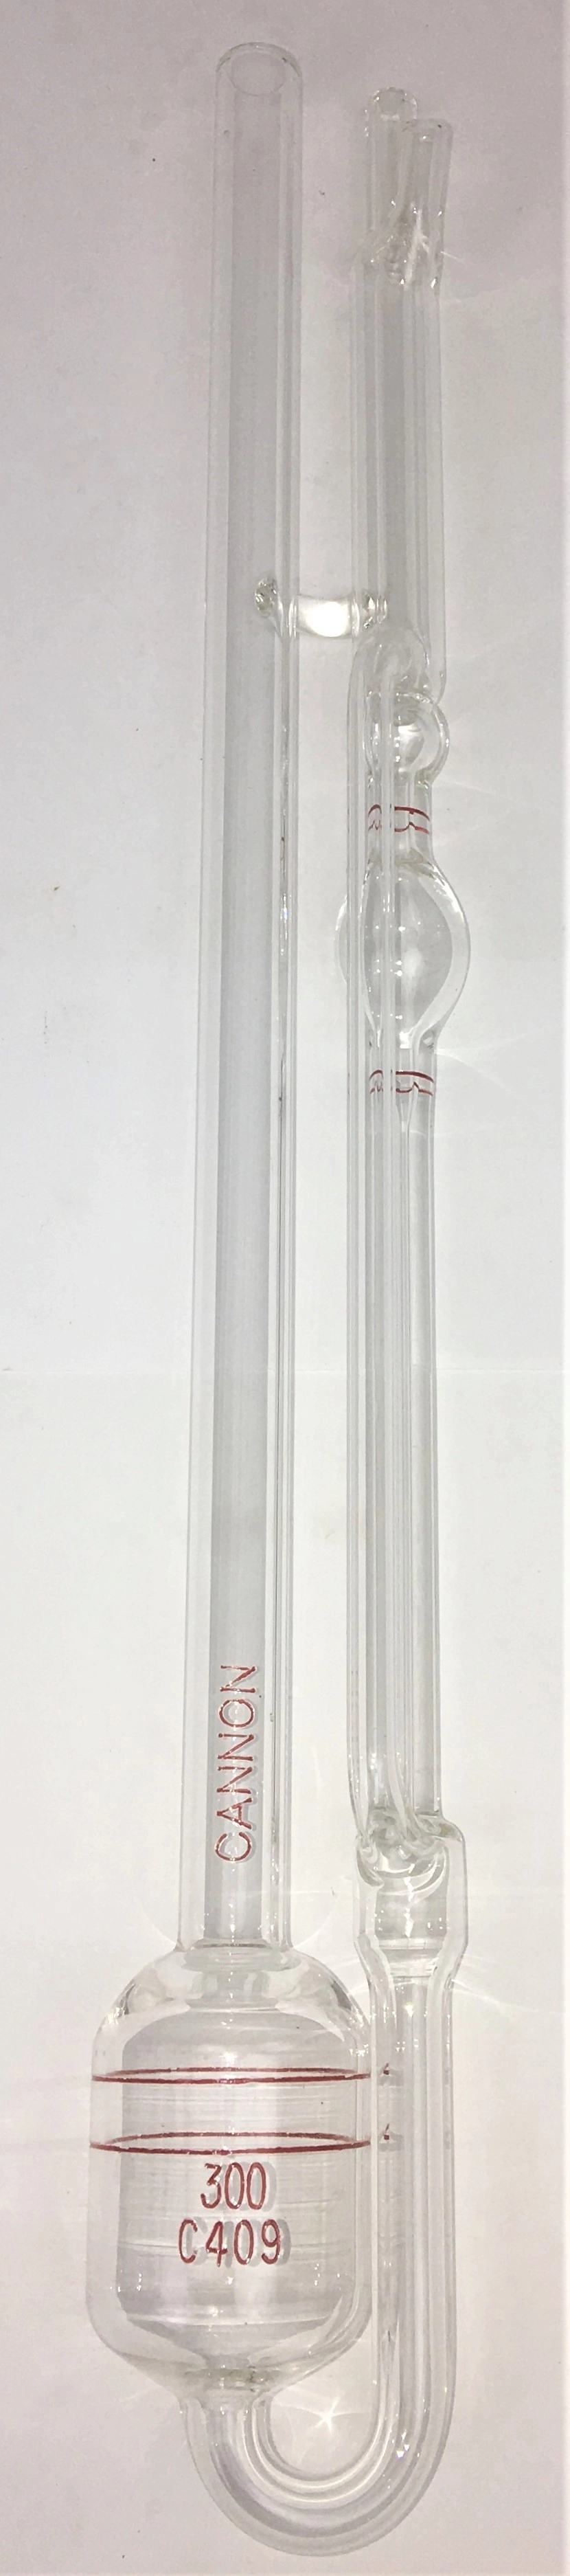 Cannon-Ubbelohde CUC-300 Certified Viscometer Tube - Size 300